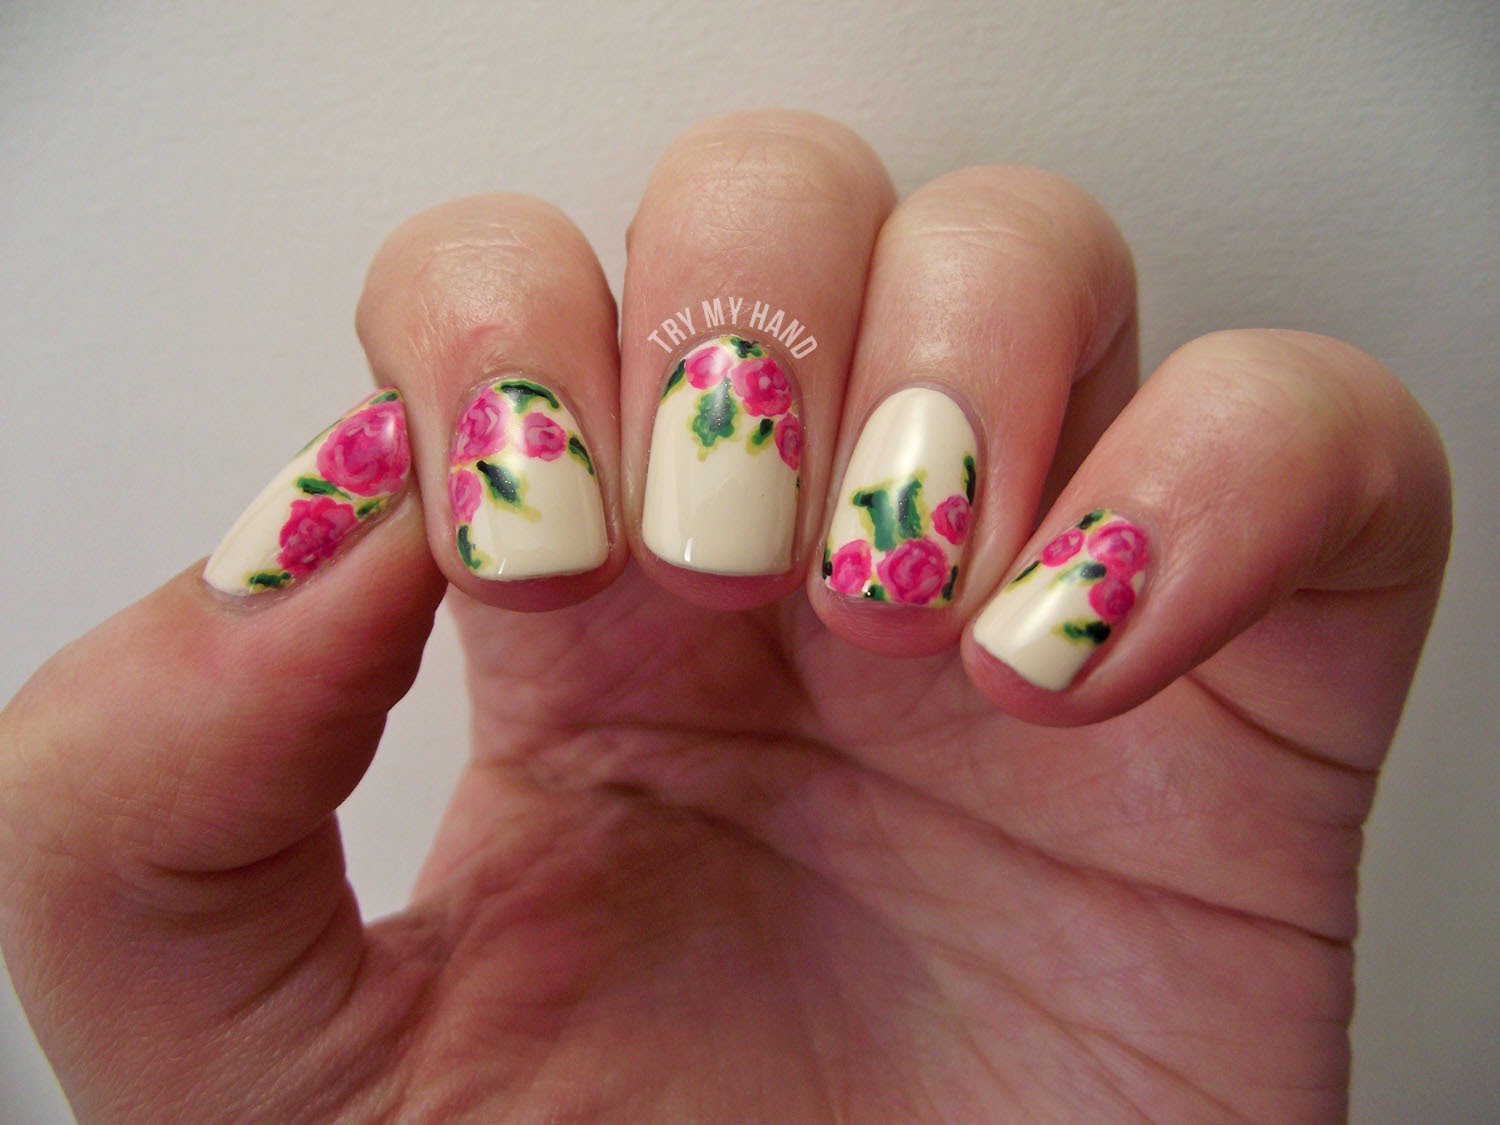 2. Quick and Easy Floral Nail Art Tutorial - wide 6